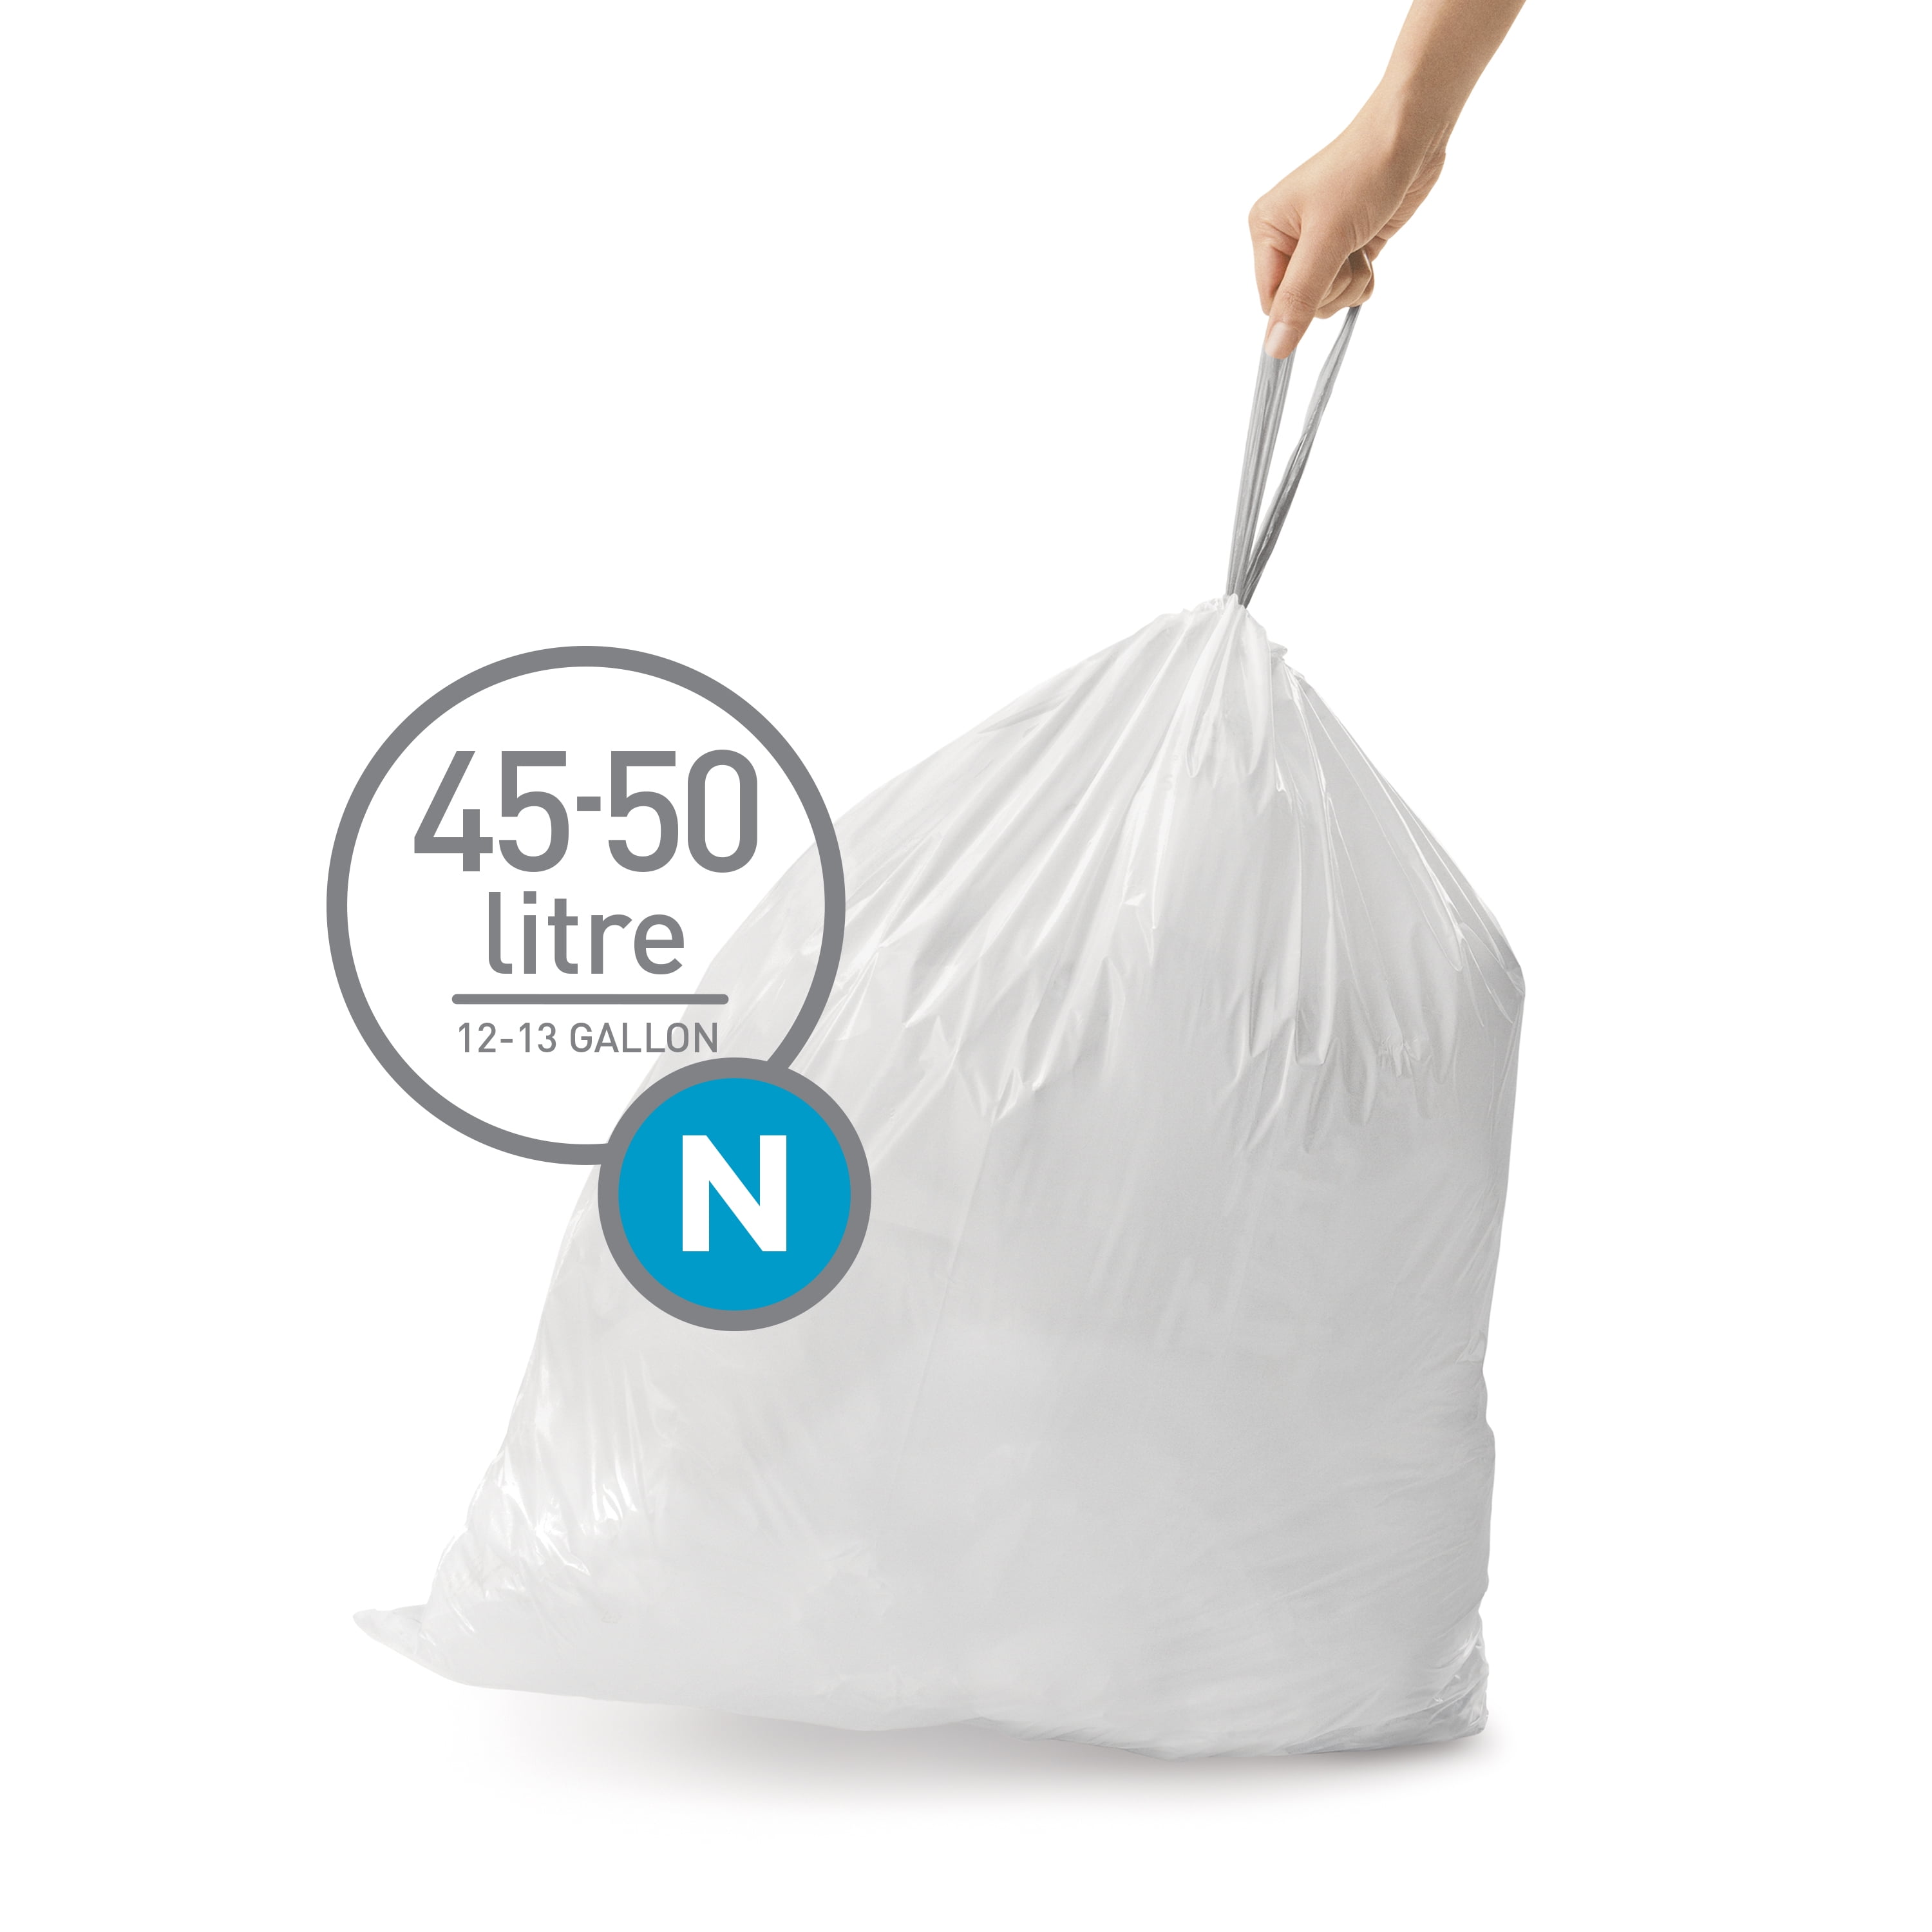 Plasticplace simplehuman (X) Code N Compatible Drawstring Garbage Liners 12-13 Gallon / 45-50 Liter 22.75 x 31.5, 50 Count, White